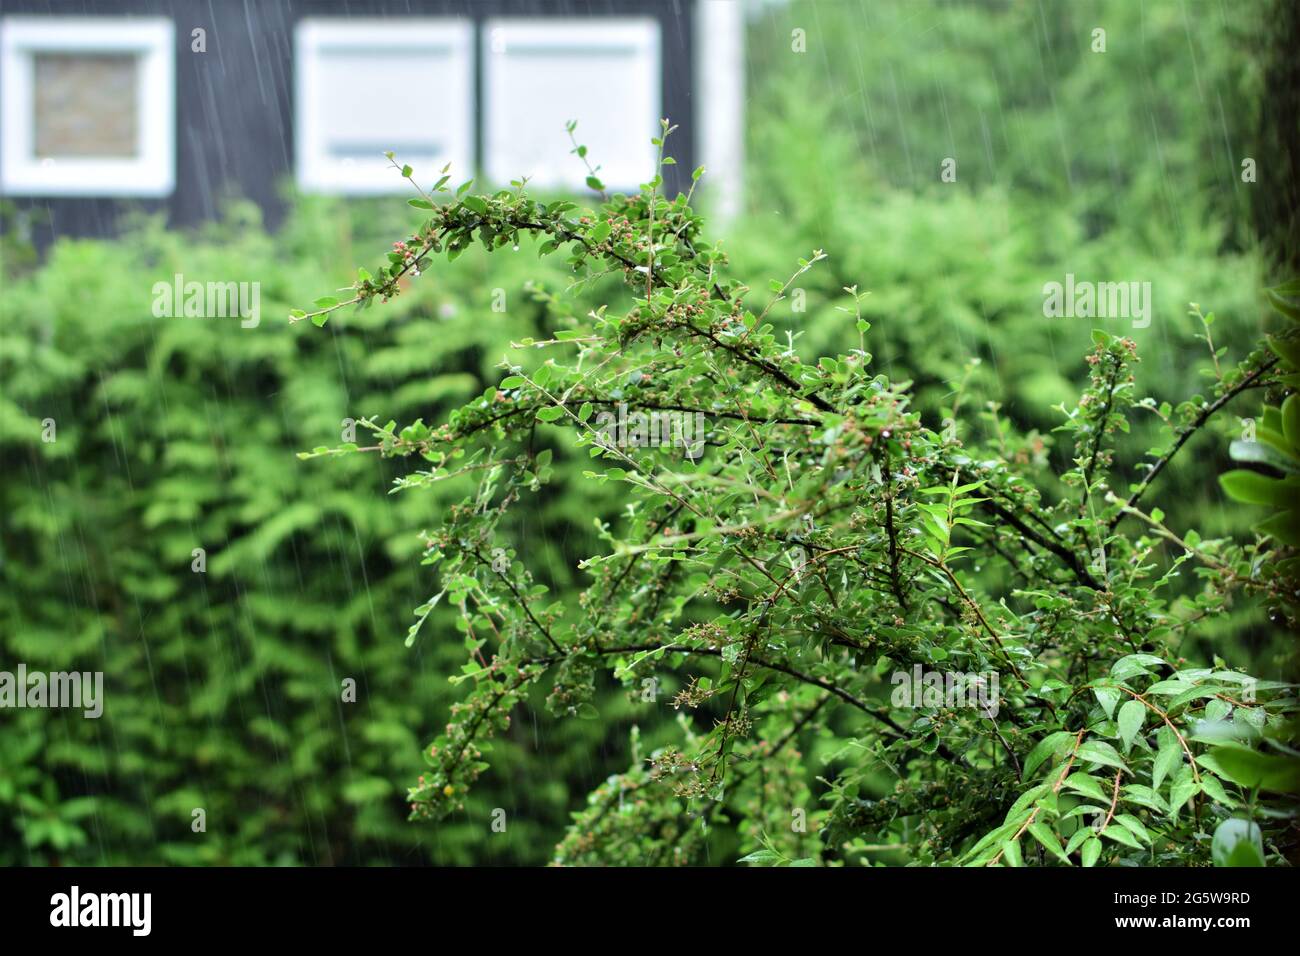 Green bush against a hedge and a house during bad weather with heavy rain Stock Photo